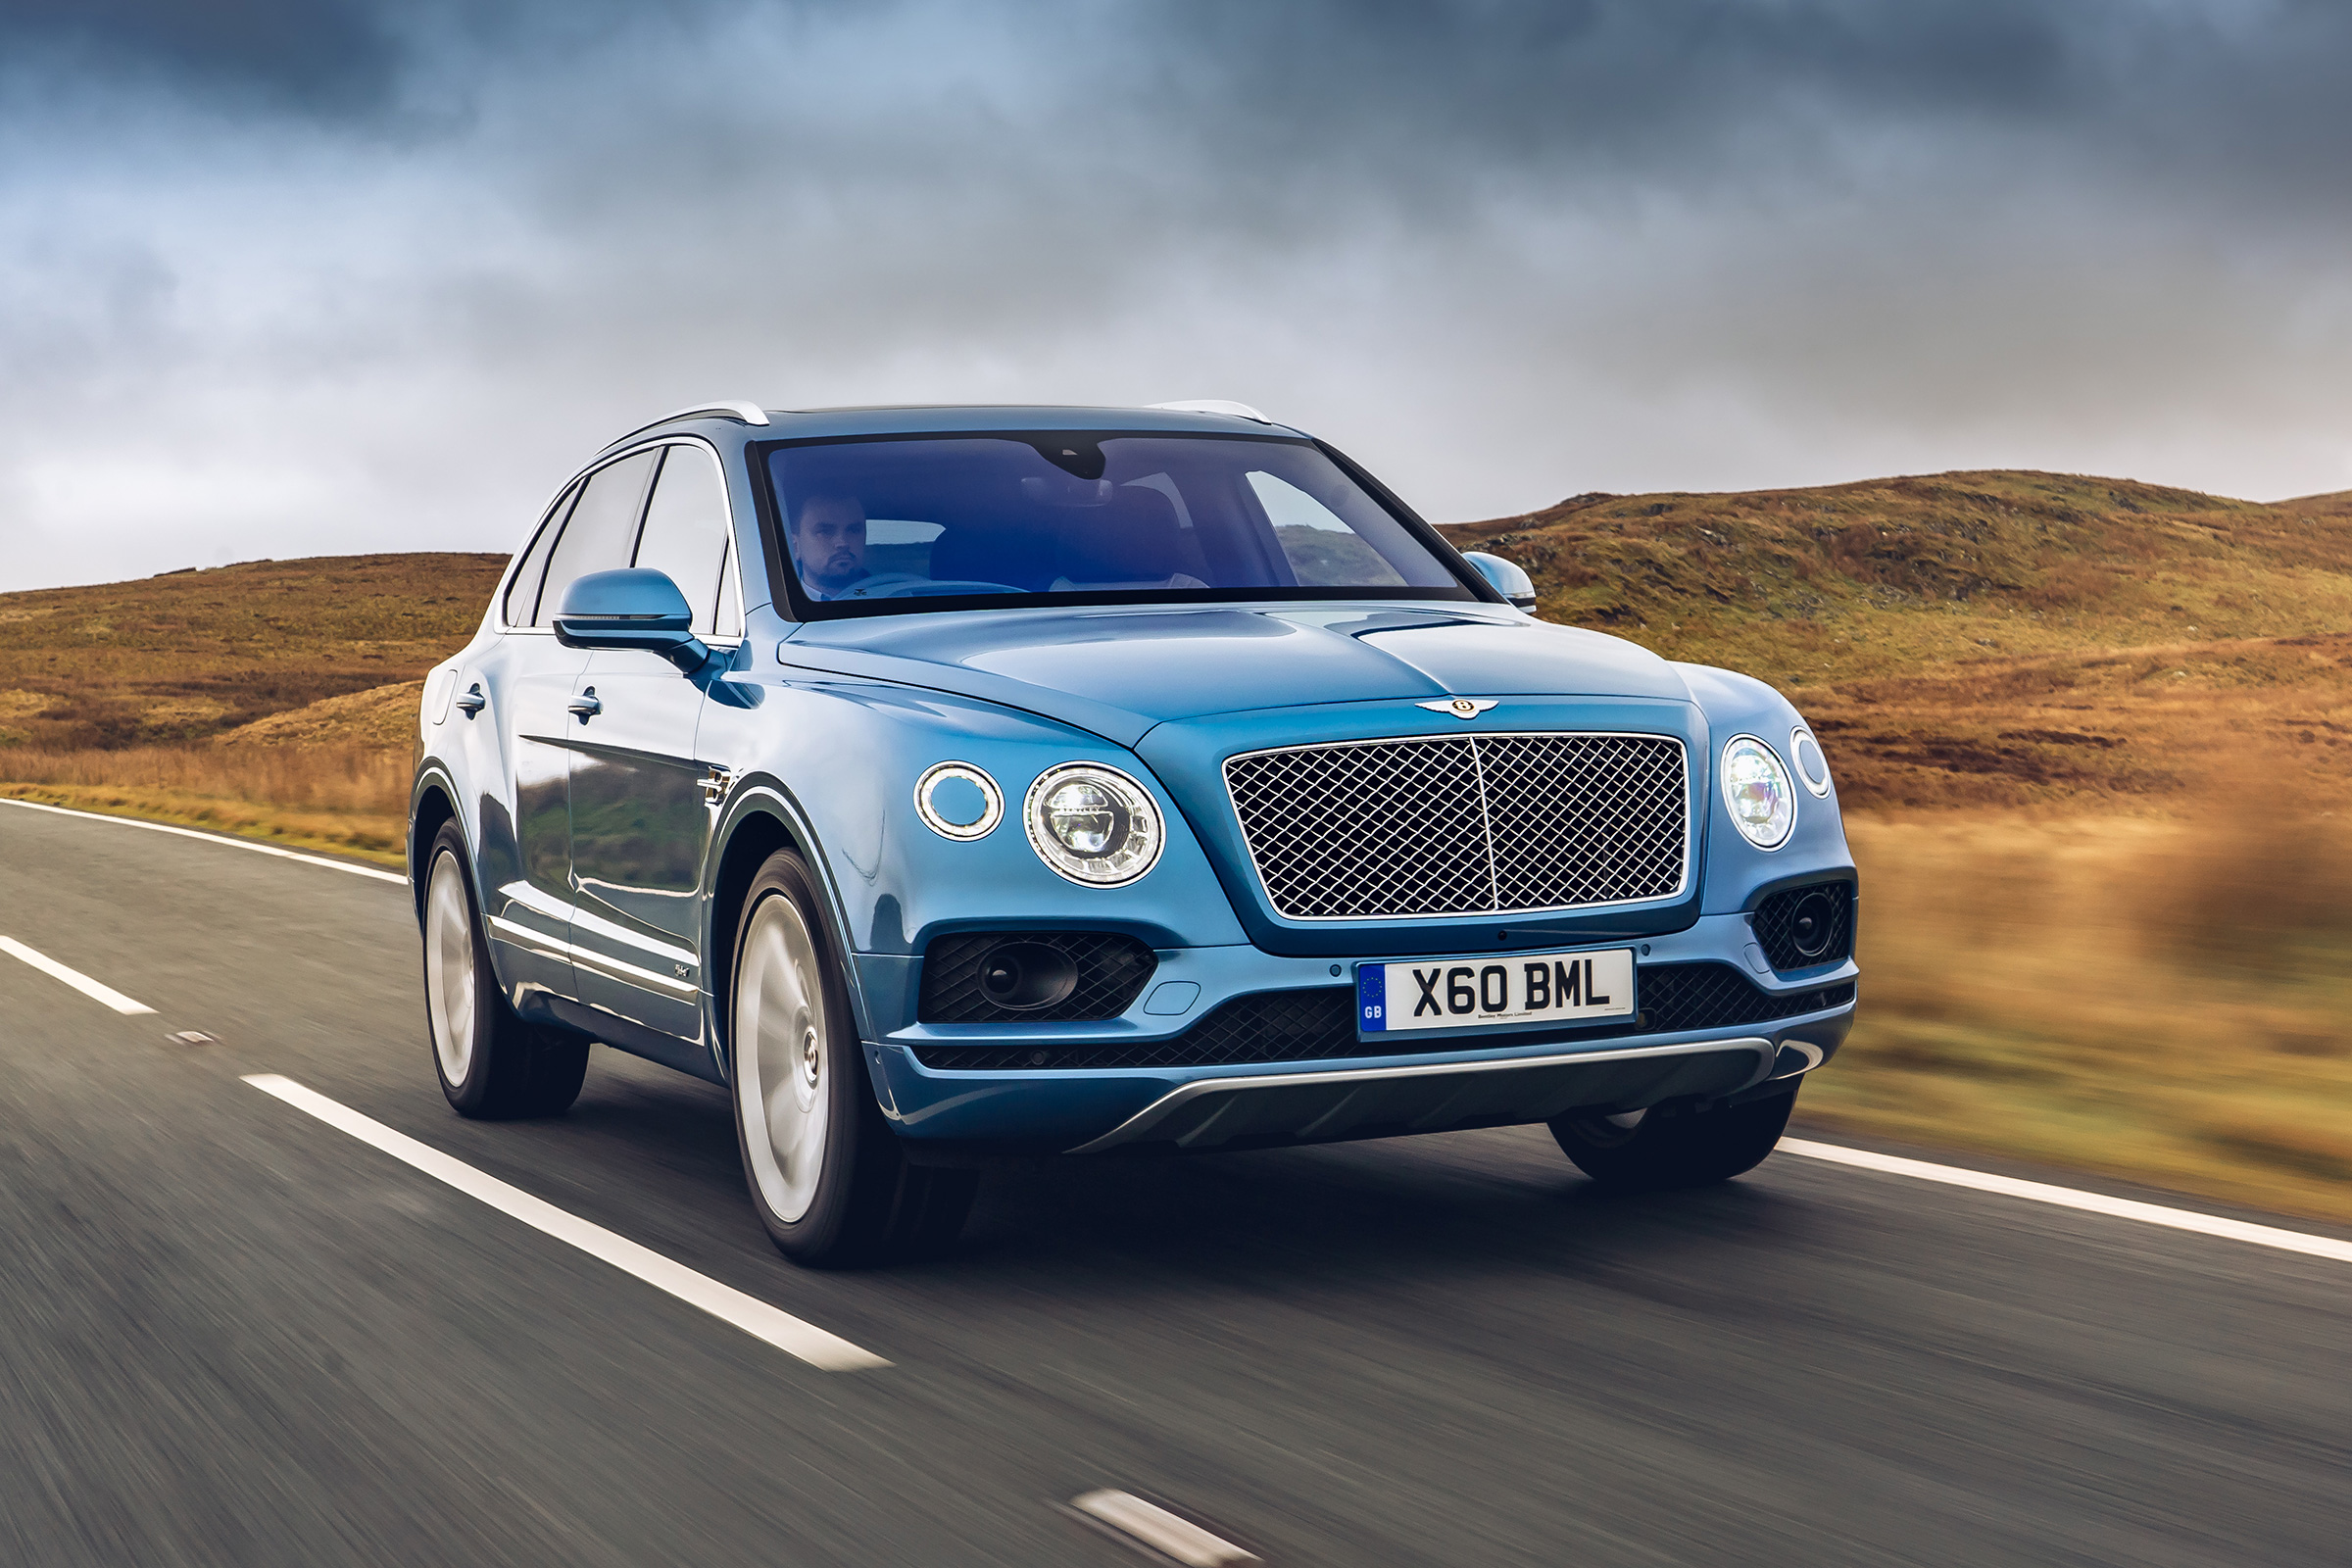 Bentley teams up with Bristol automotive experts in drive to develop